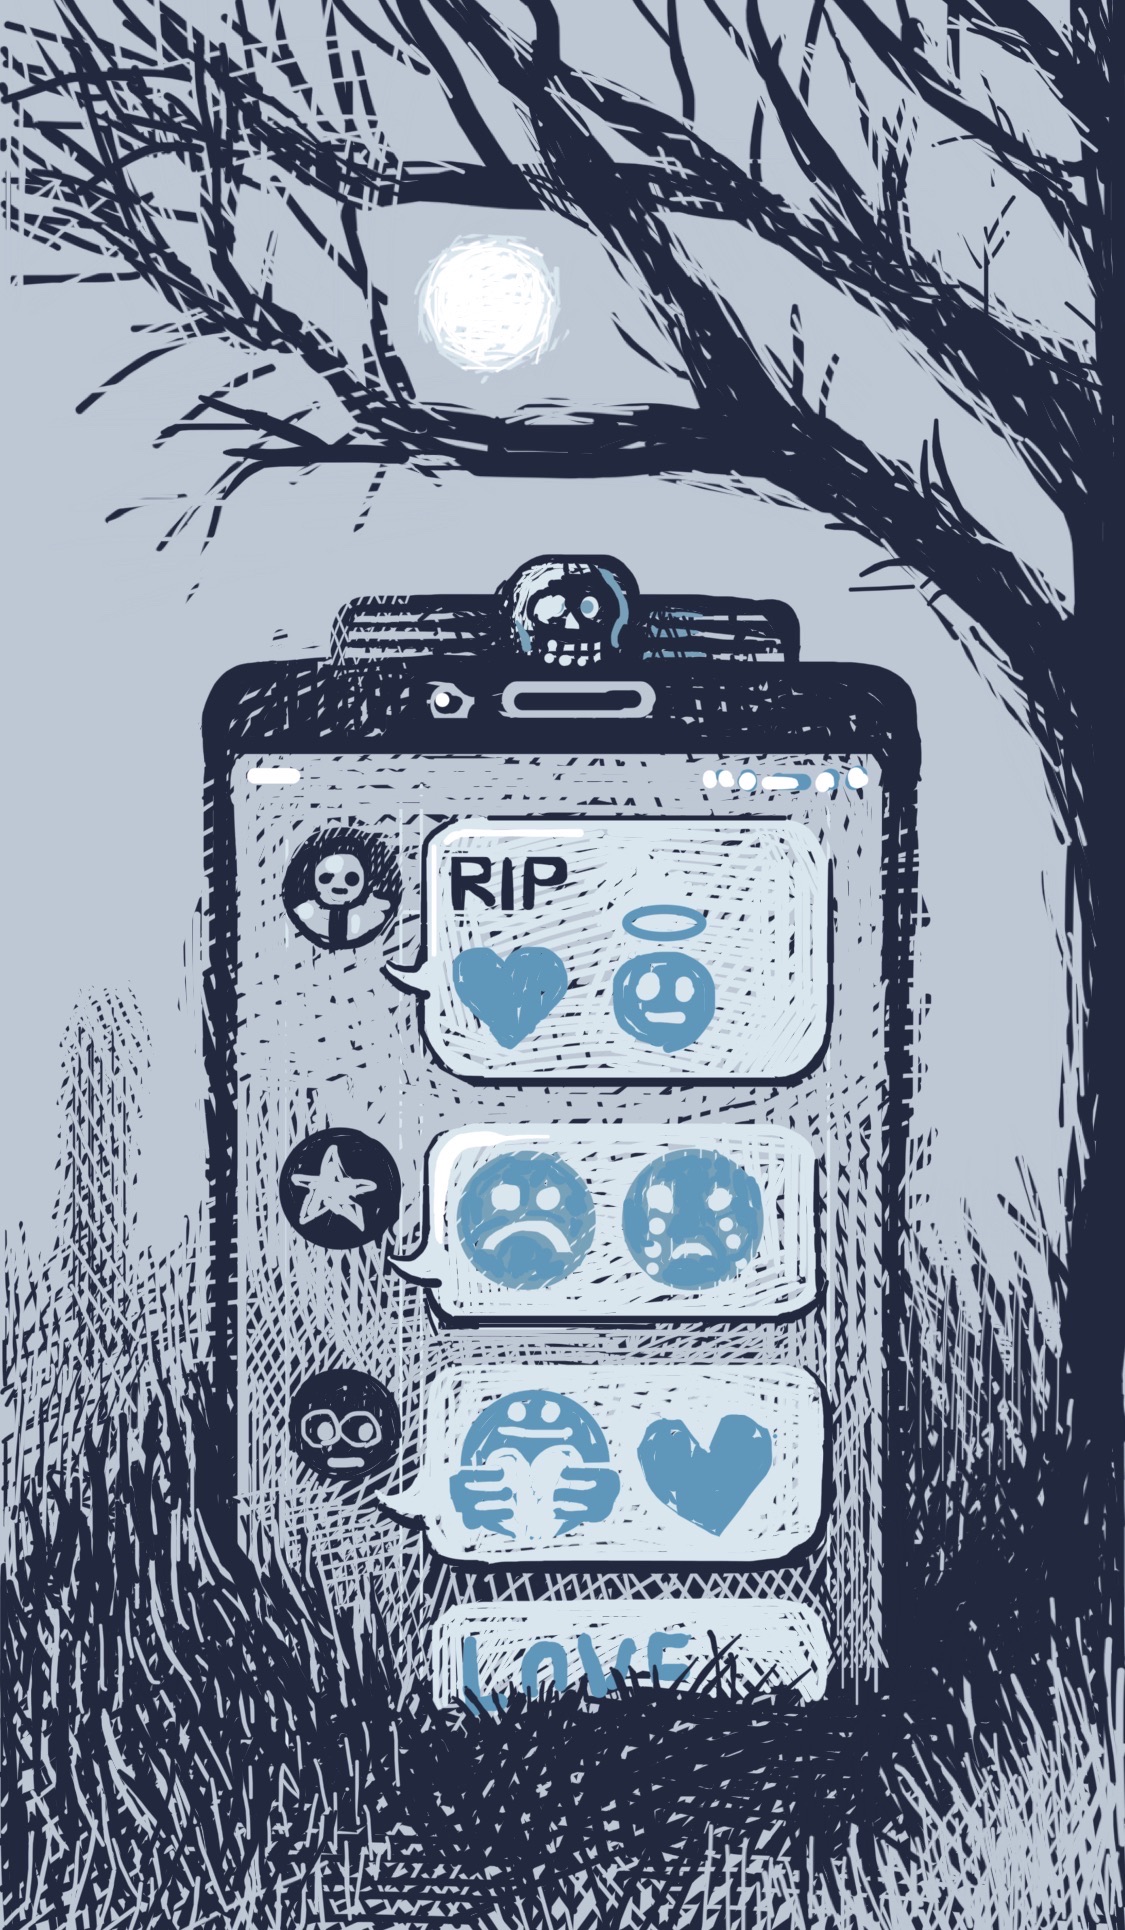 A tombstone in a cemetery that's also a phone displaying a chat app, with emoji of condolence on the app. A tree hangs over the tomb-phone